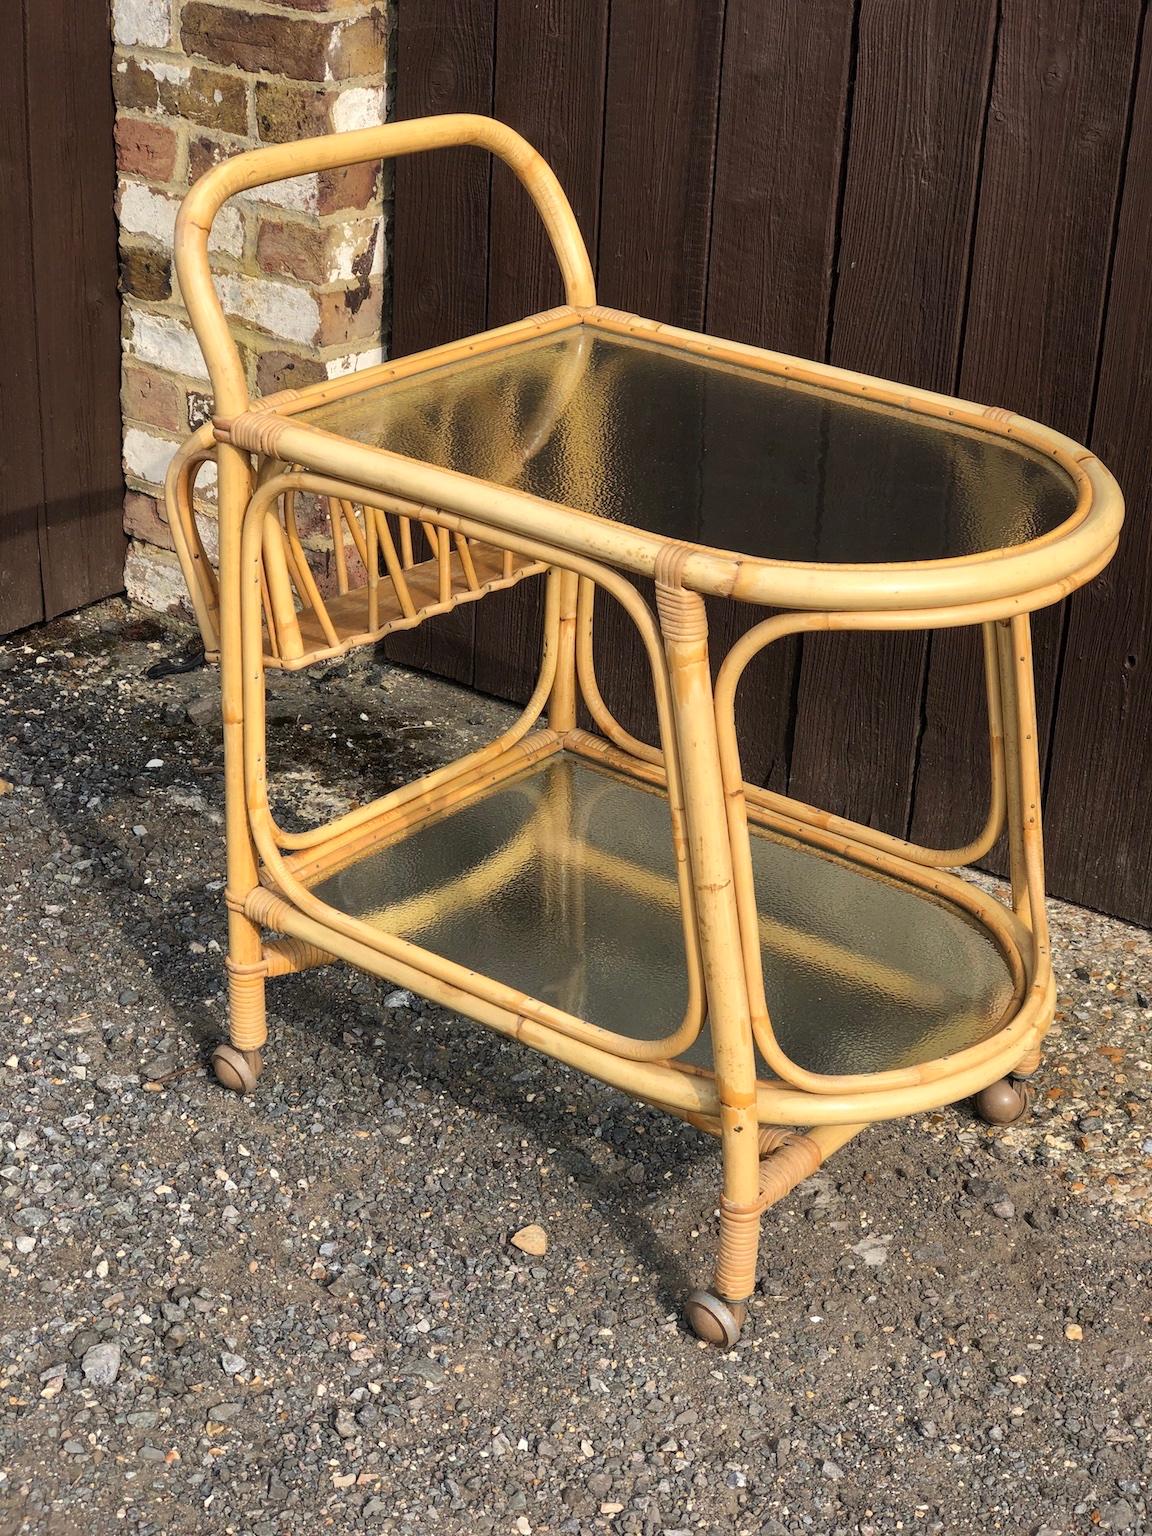 Mid Century Rattan / Cane Drinks Trolley by Angraves, circa 1970

A beautiful vintage rattan drinks trolley / bar cart by ‘Angraves’ of Leicester. Two tiers with glass shelves, 
bottle holder (4 bottles) on 4 x metal castors.
This trolley is in